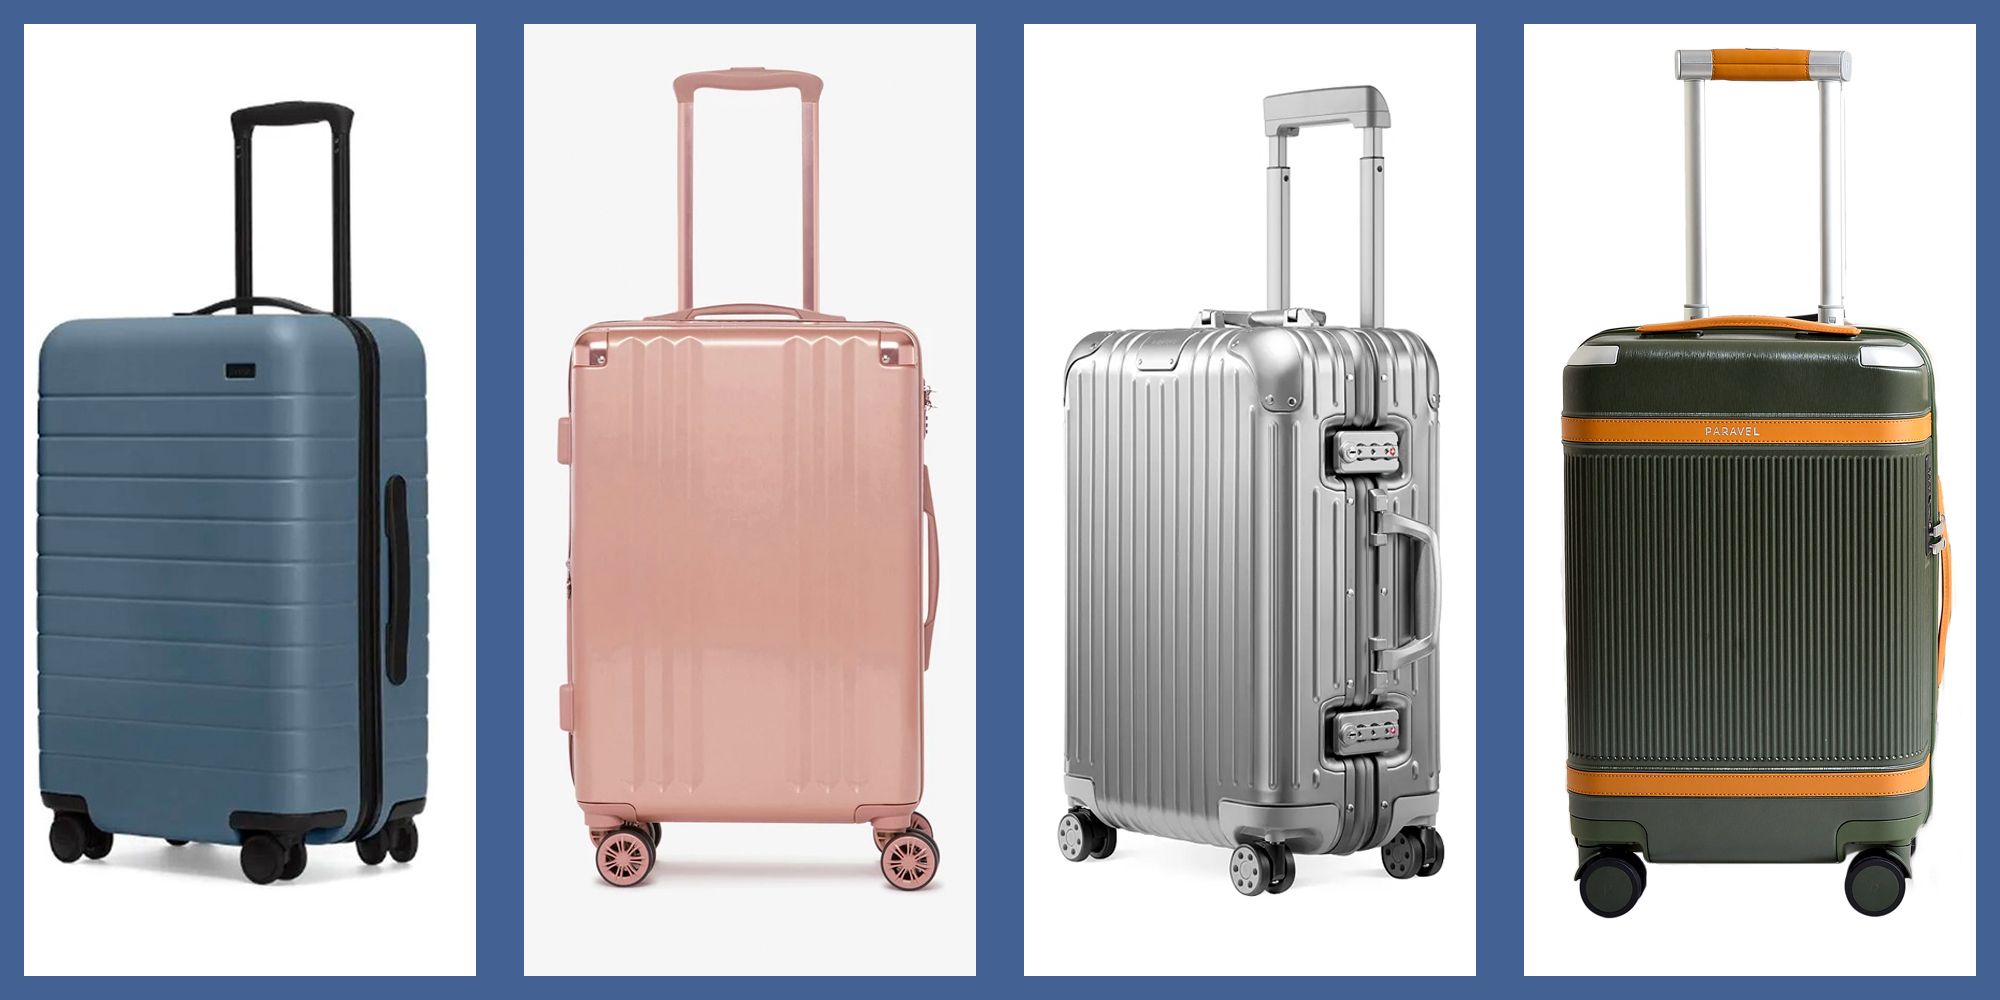 Top 10 Most Expensive Luggage Sets 2015